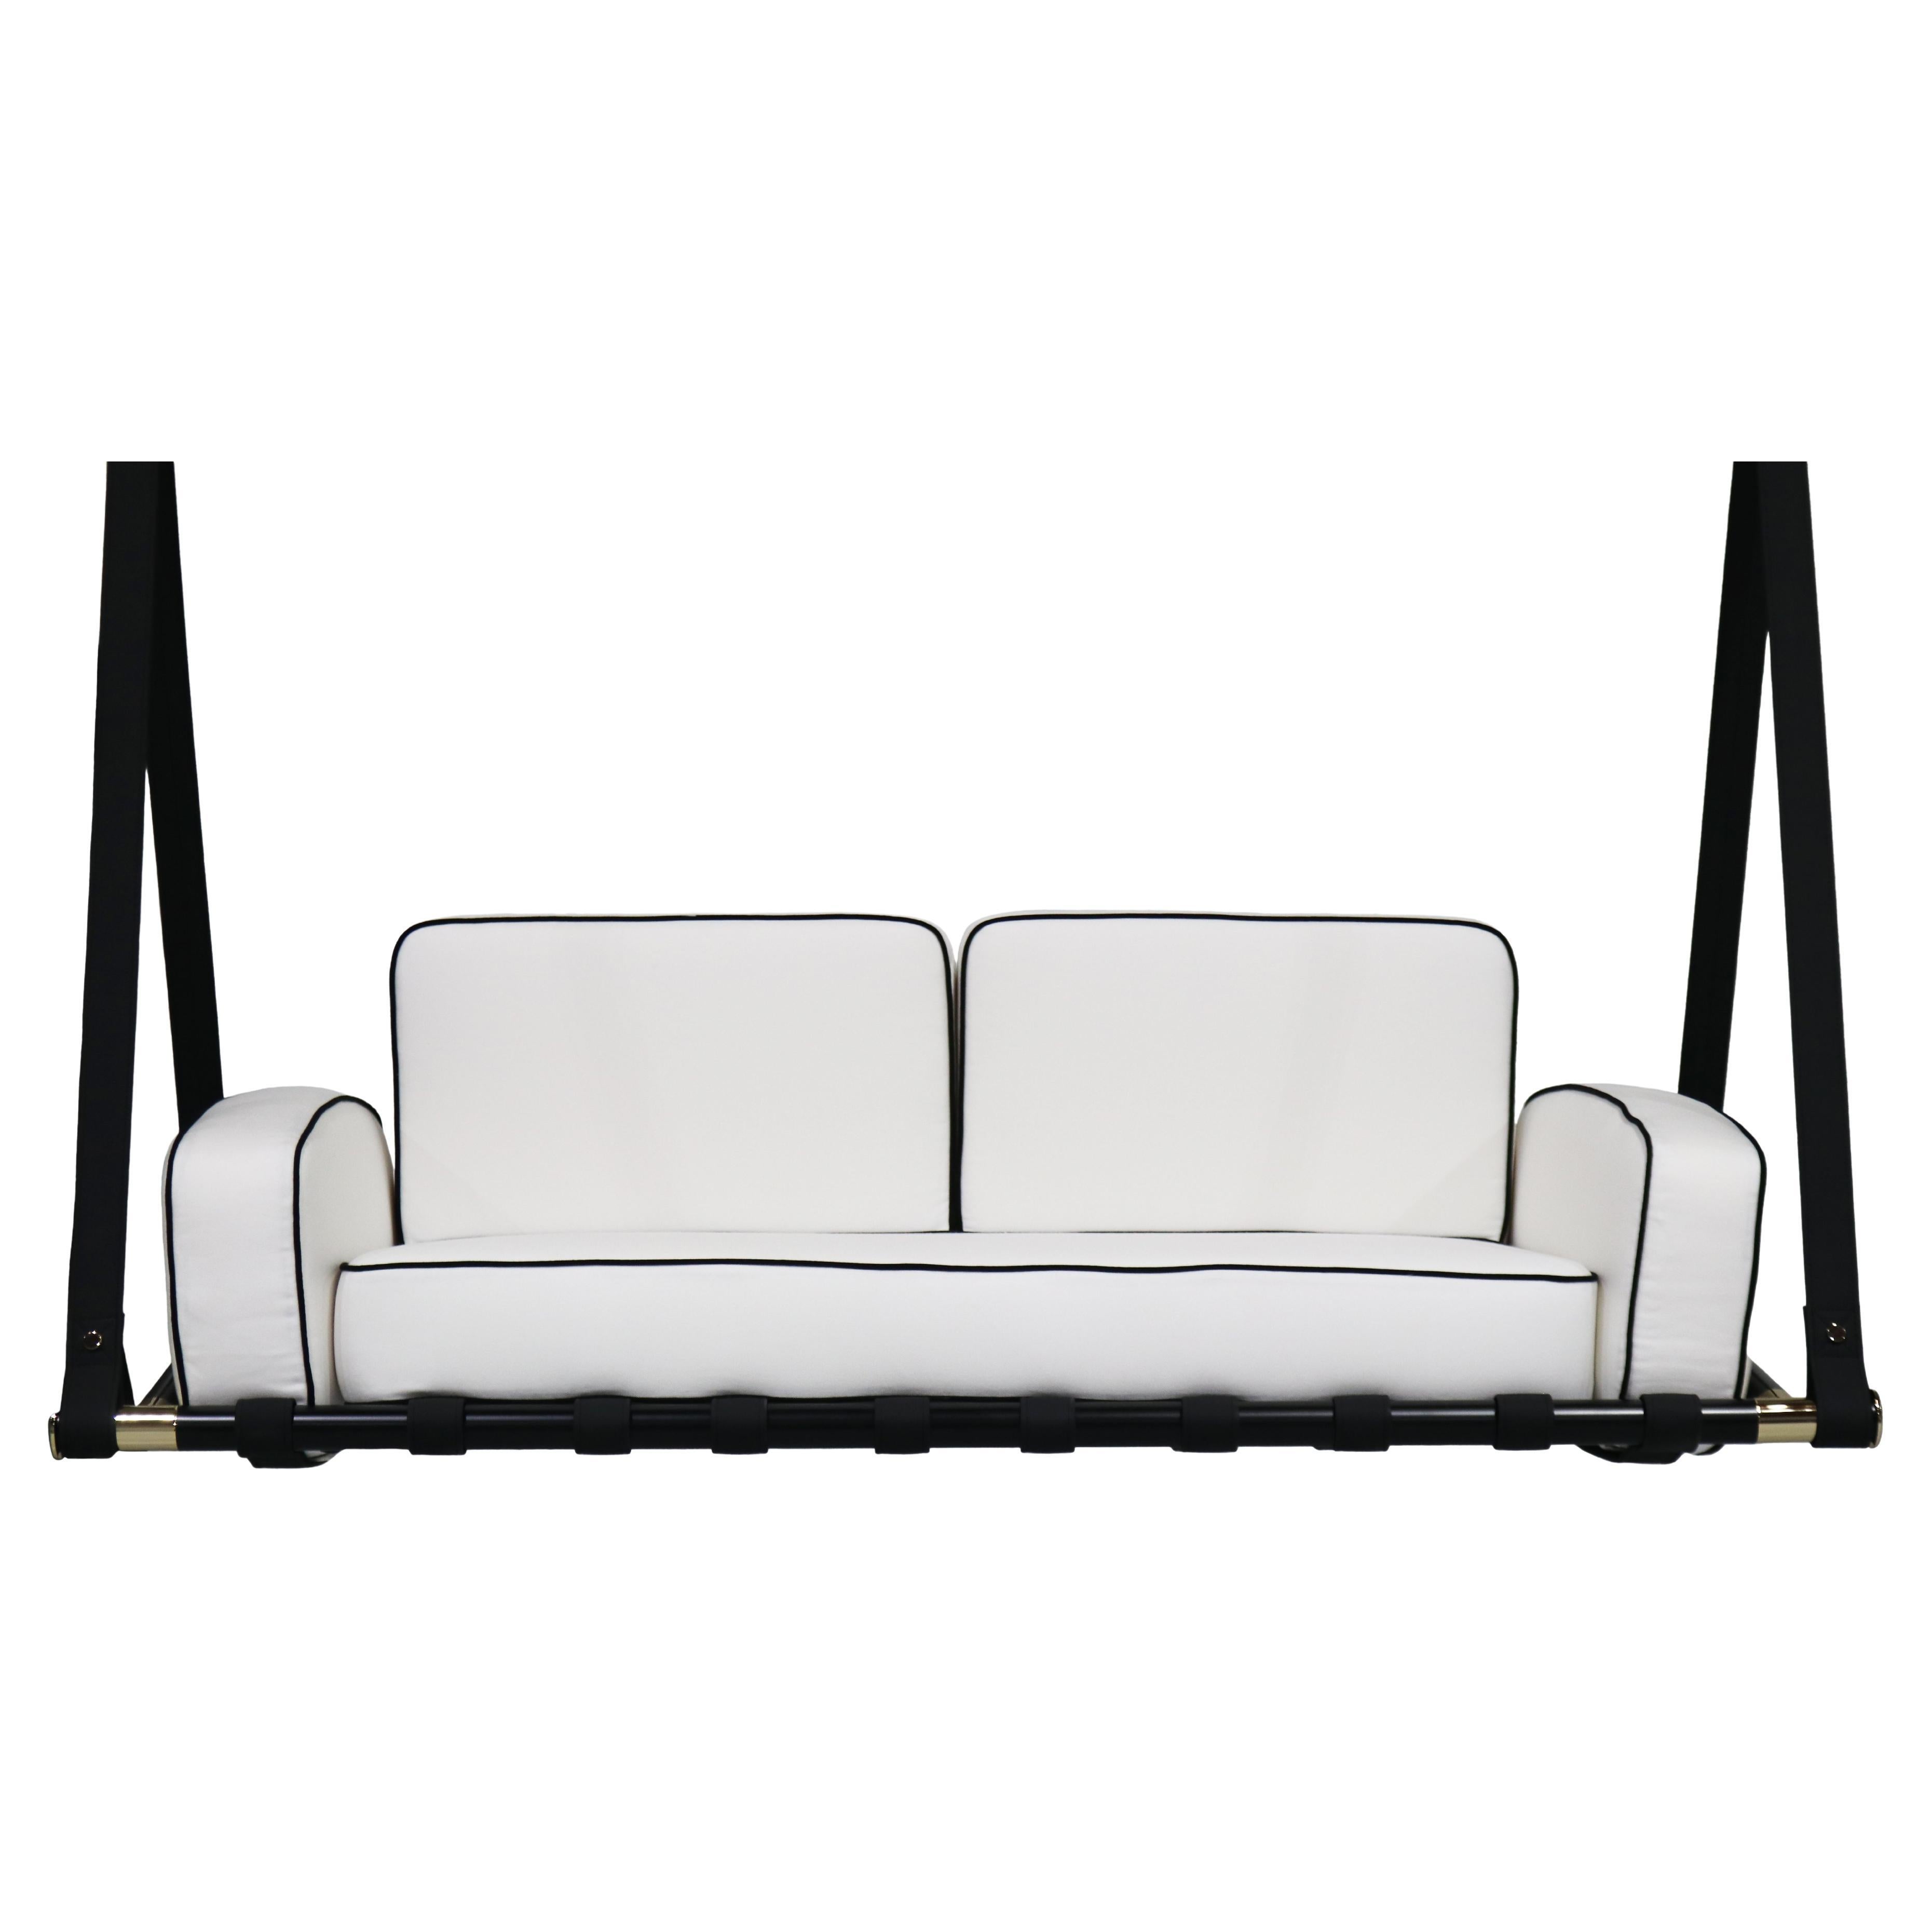 Black and White Outdoor Weather Resistant Hanging Sofa For Sale